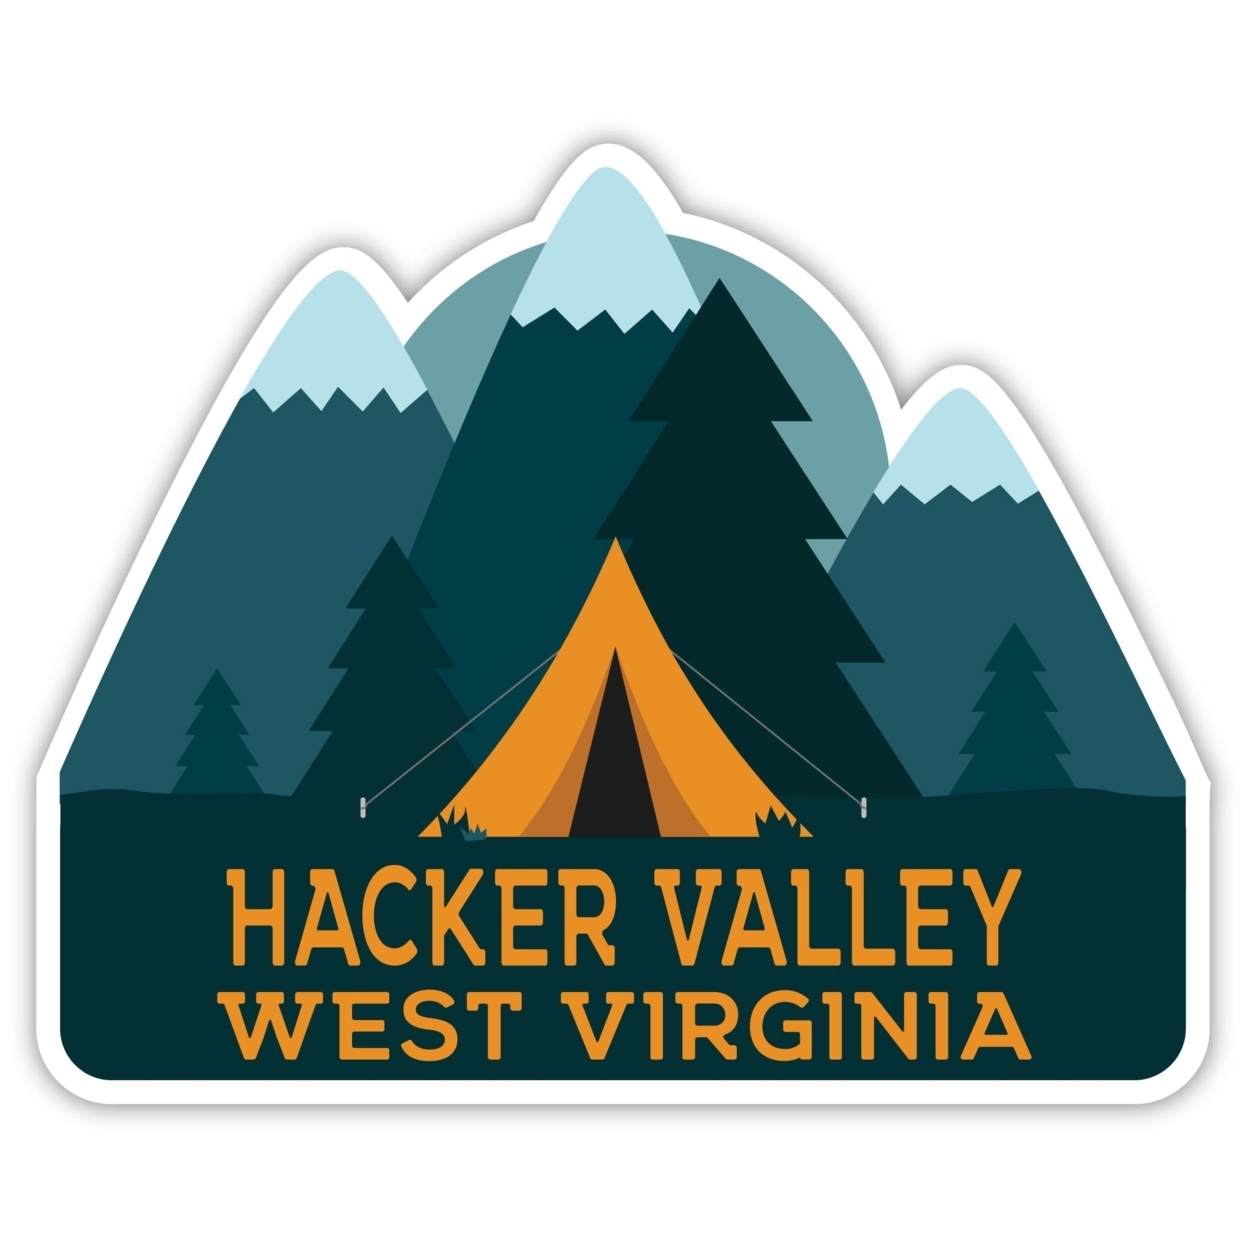 Hacker Valley West Virginia Souvenir Decorative Stickers (Choose Theme And Size) - 4-Pack, 2-Inch, Tent